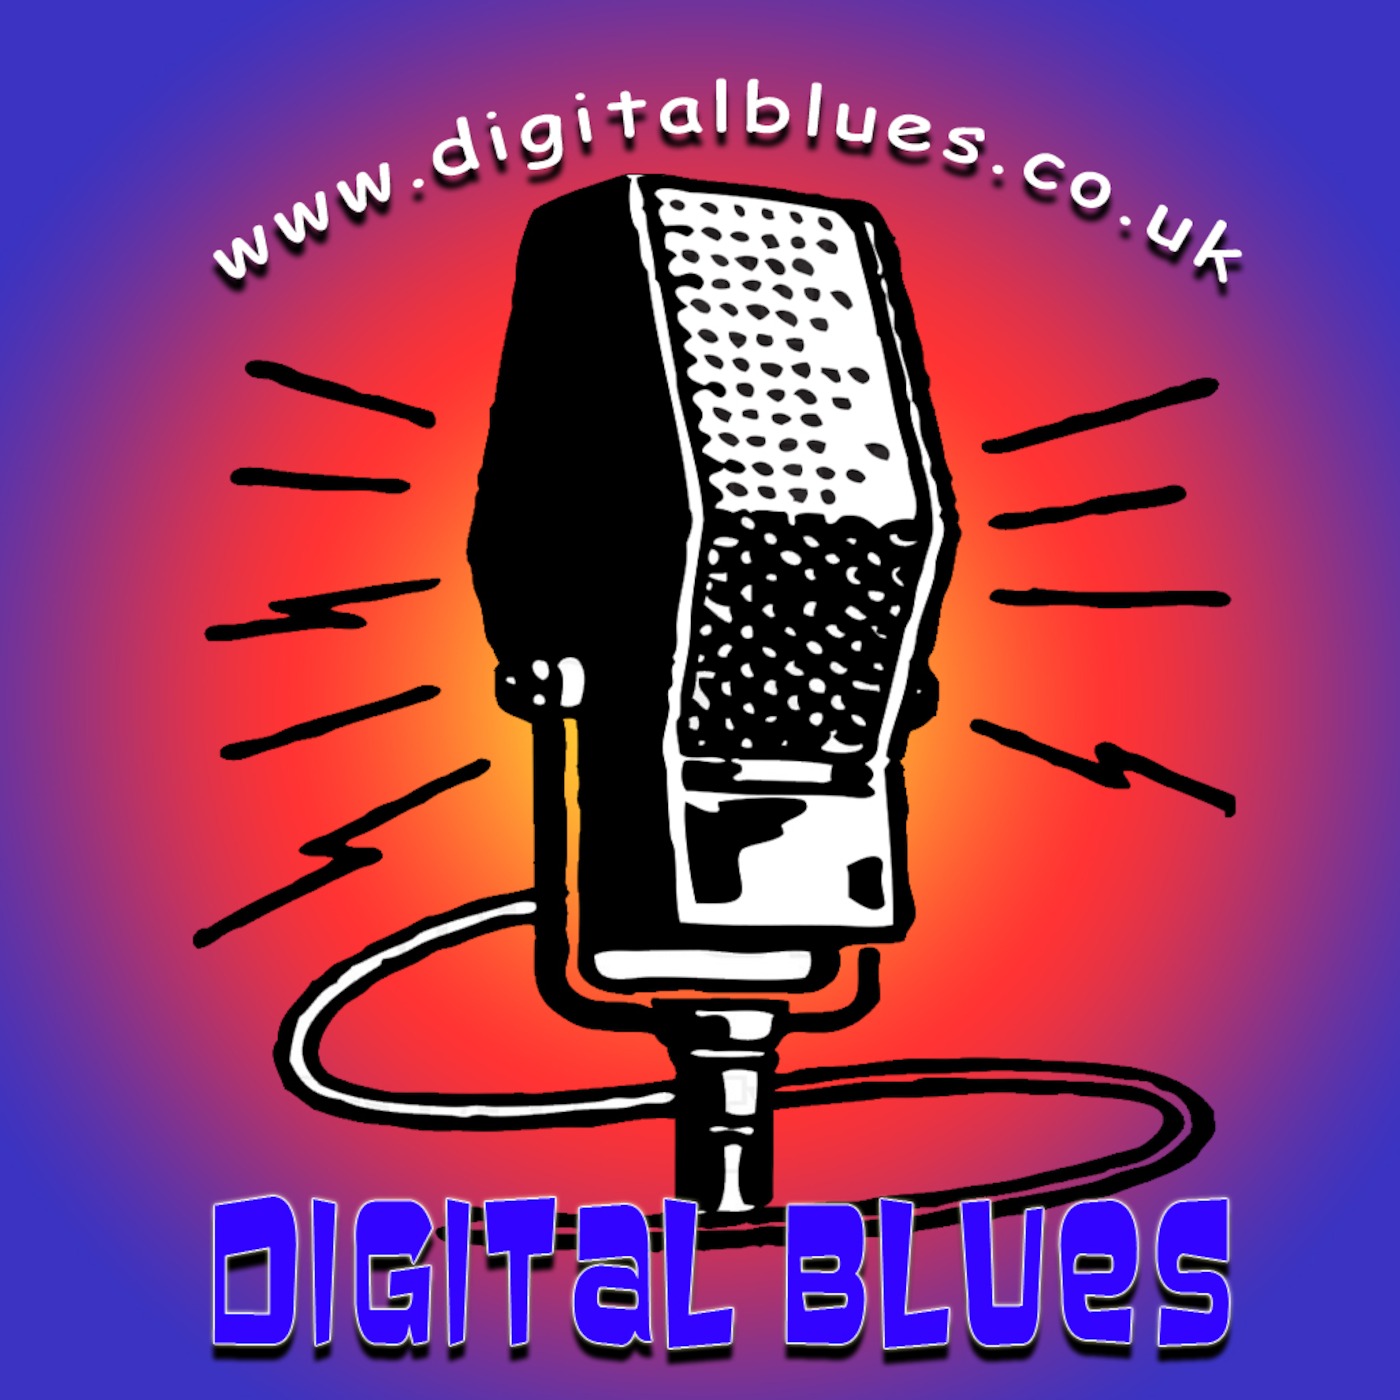 Episode 90: DIGITAL BLUES - WEEK COMMENCING 17TH JANUARY 2021